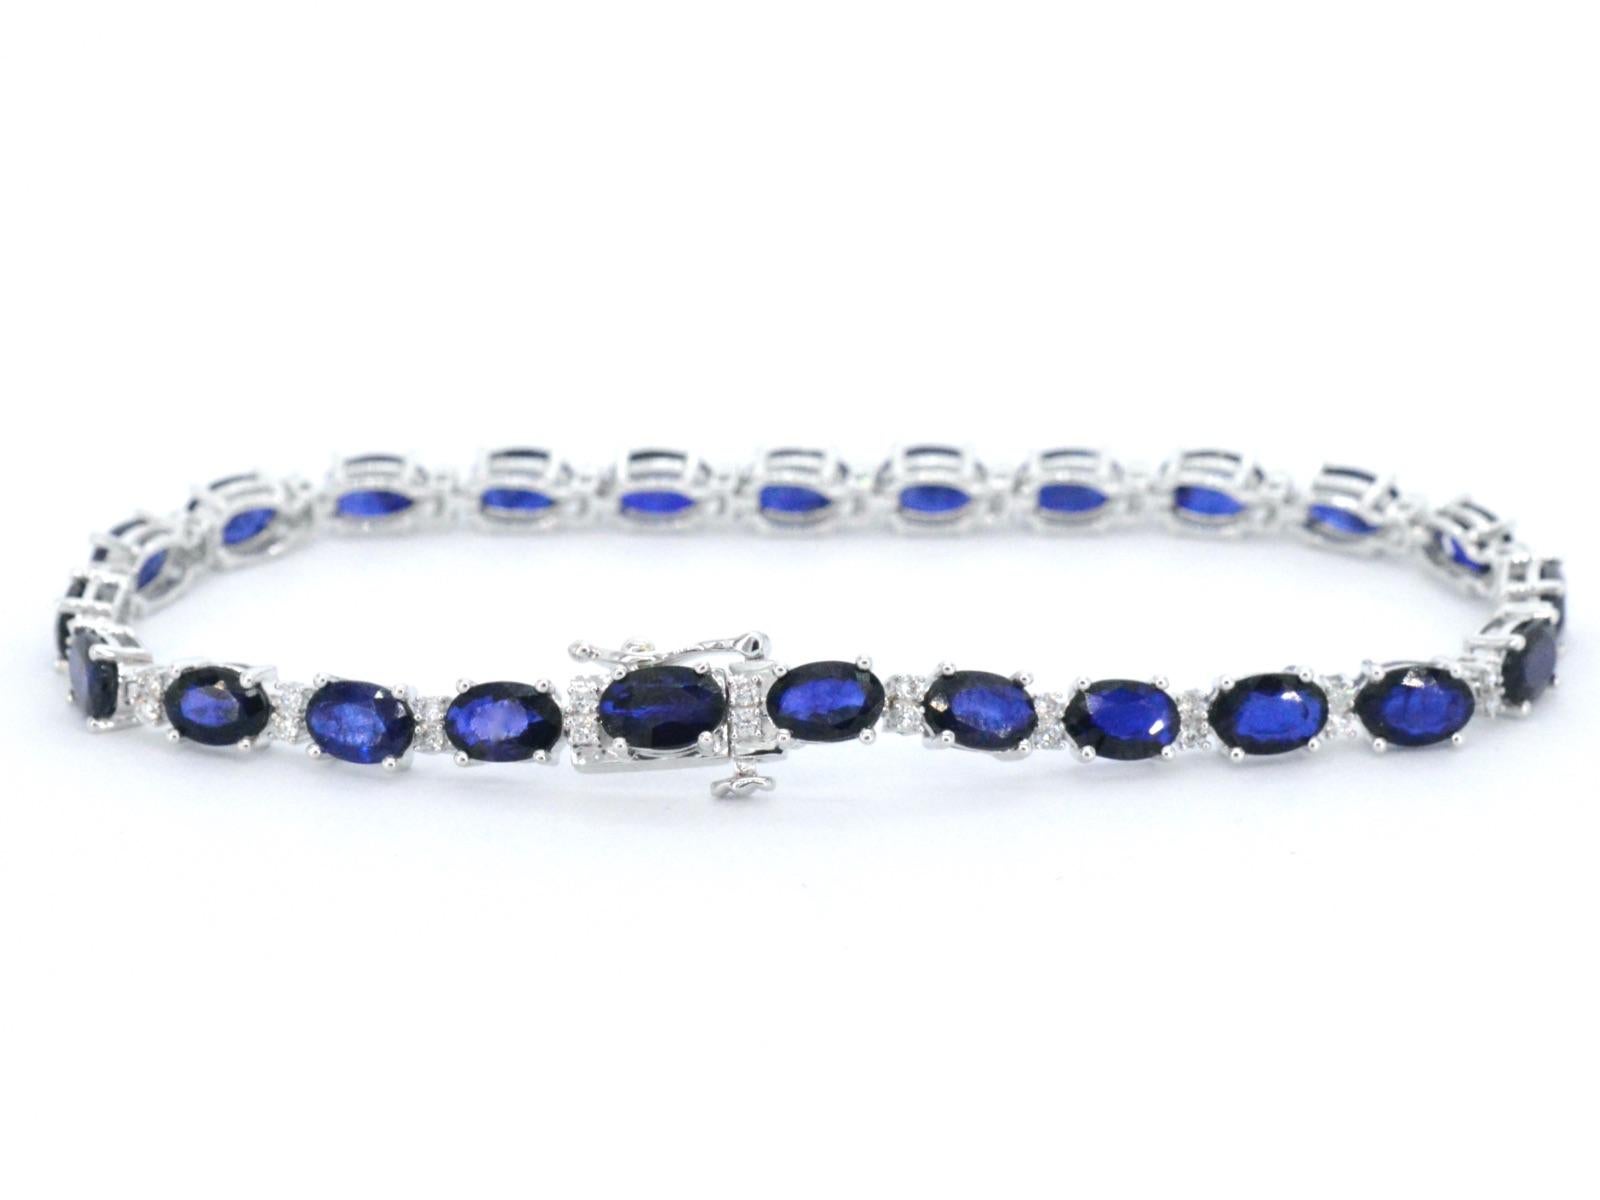 This exquisite bracelet features a combination of sparkling diamonds and a stunning sapphire, making it a perfect accessory for any occasion. 

The bracelet includes 0.50 carats of brilliant-cut diamonds, with a color grading of F-G and a clarity